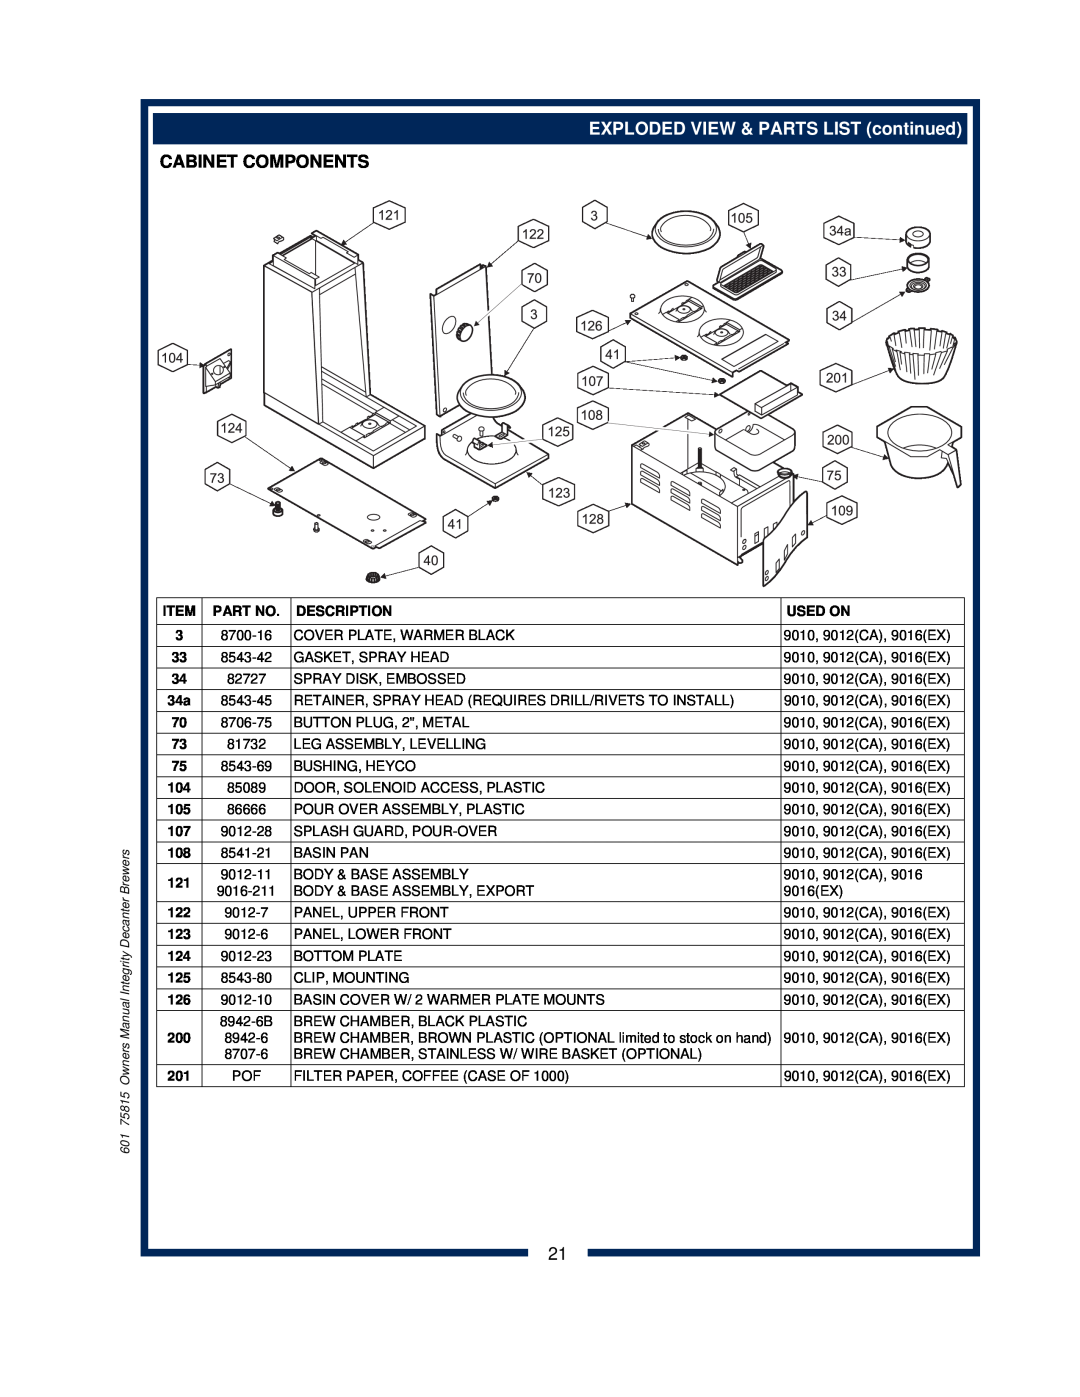 Bloomfield 9012, 9010, 9016 EXPLODED VIEW & PARTS LIST continued, Cabinet Components, Item, Part No, Description, Used On 